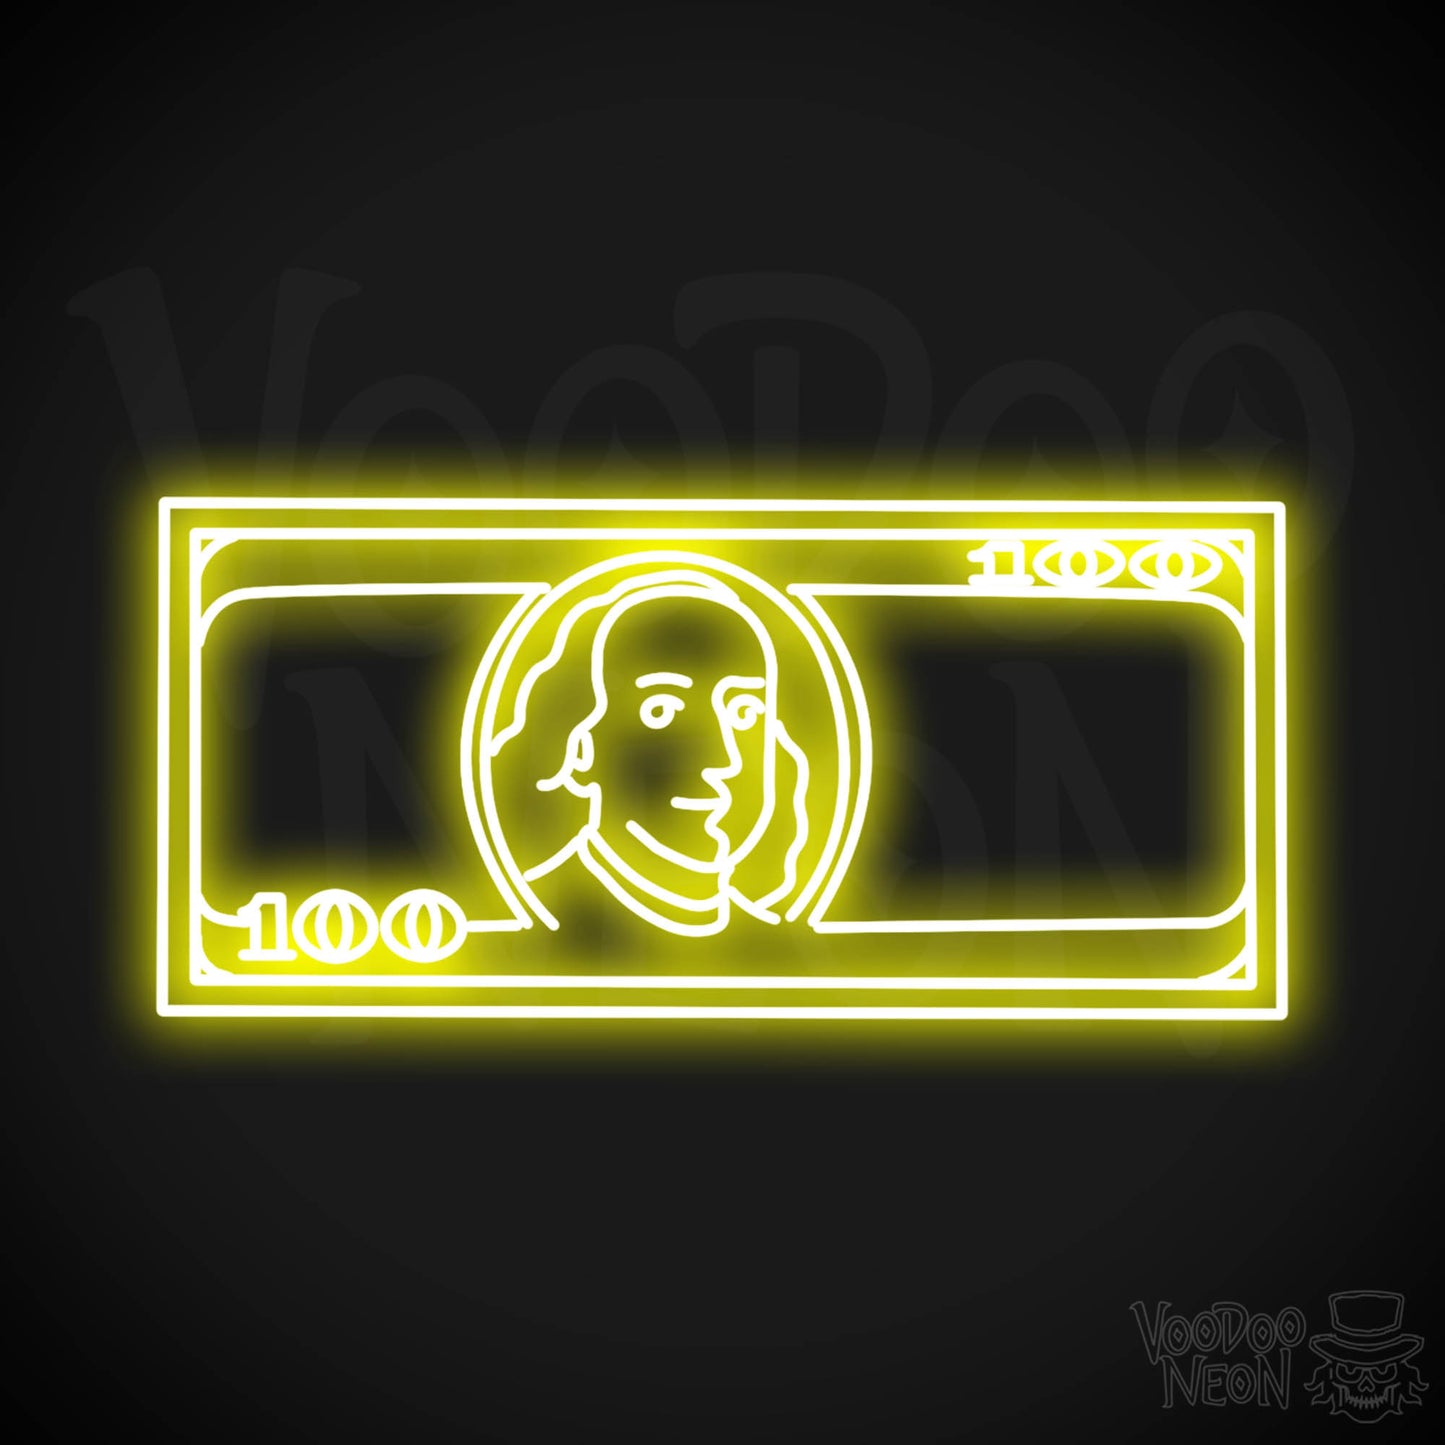 US $100 Bill Neon Sign - Neon $100 Sign - Color Yellow